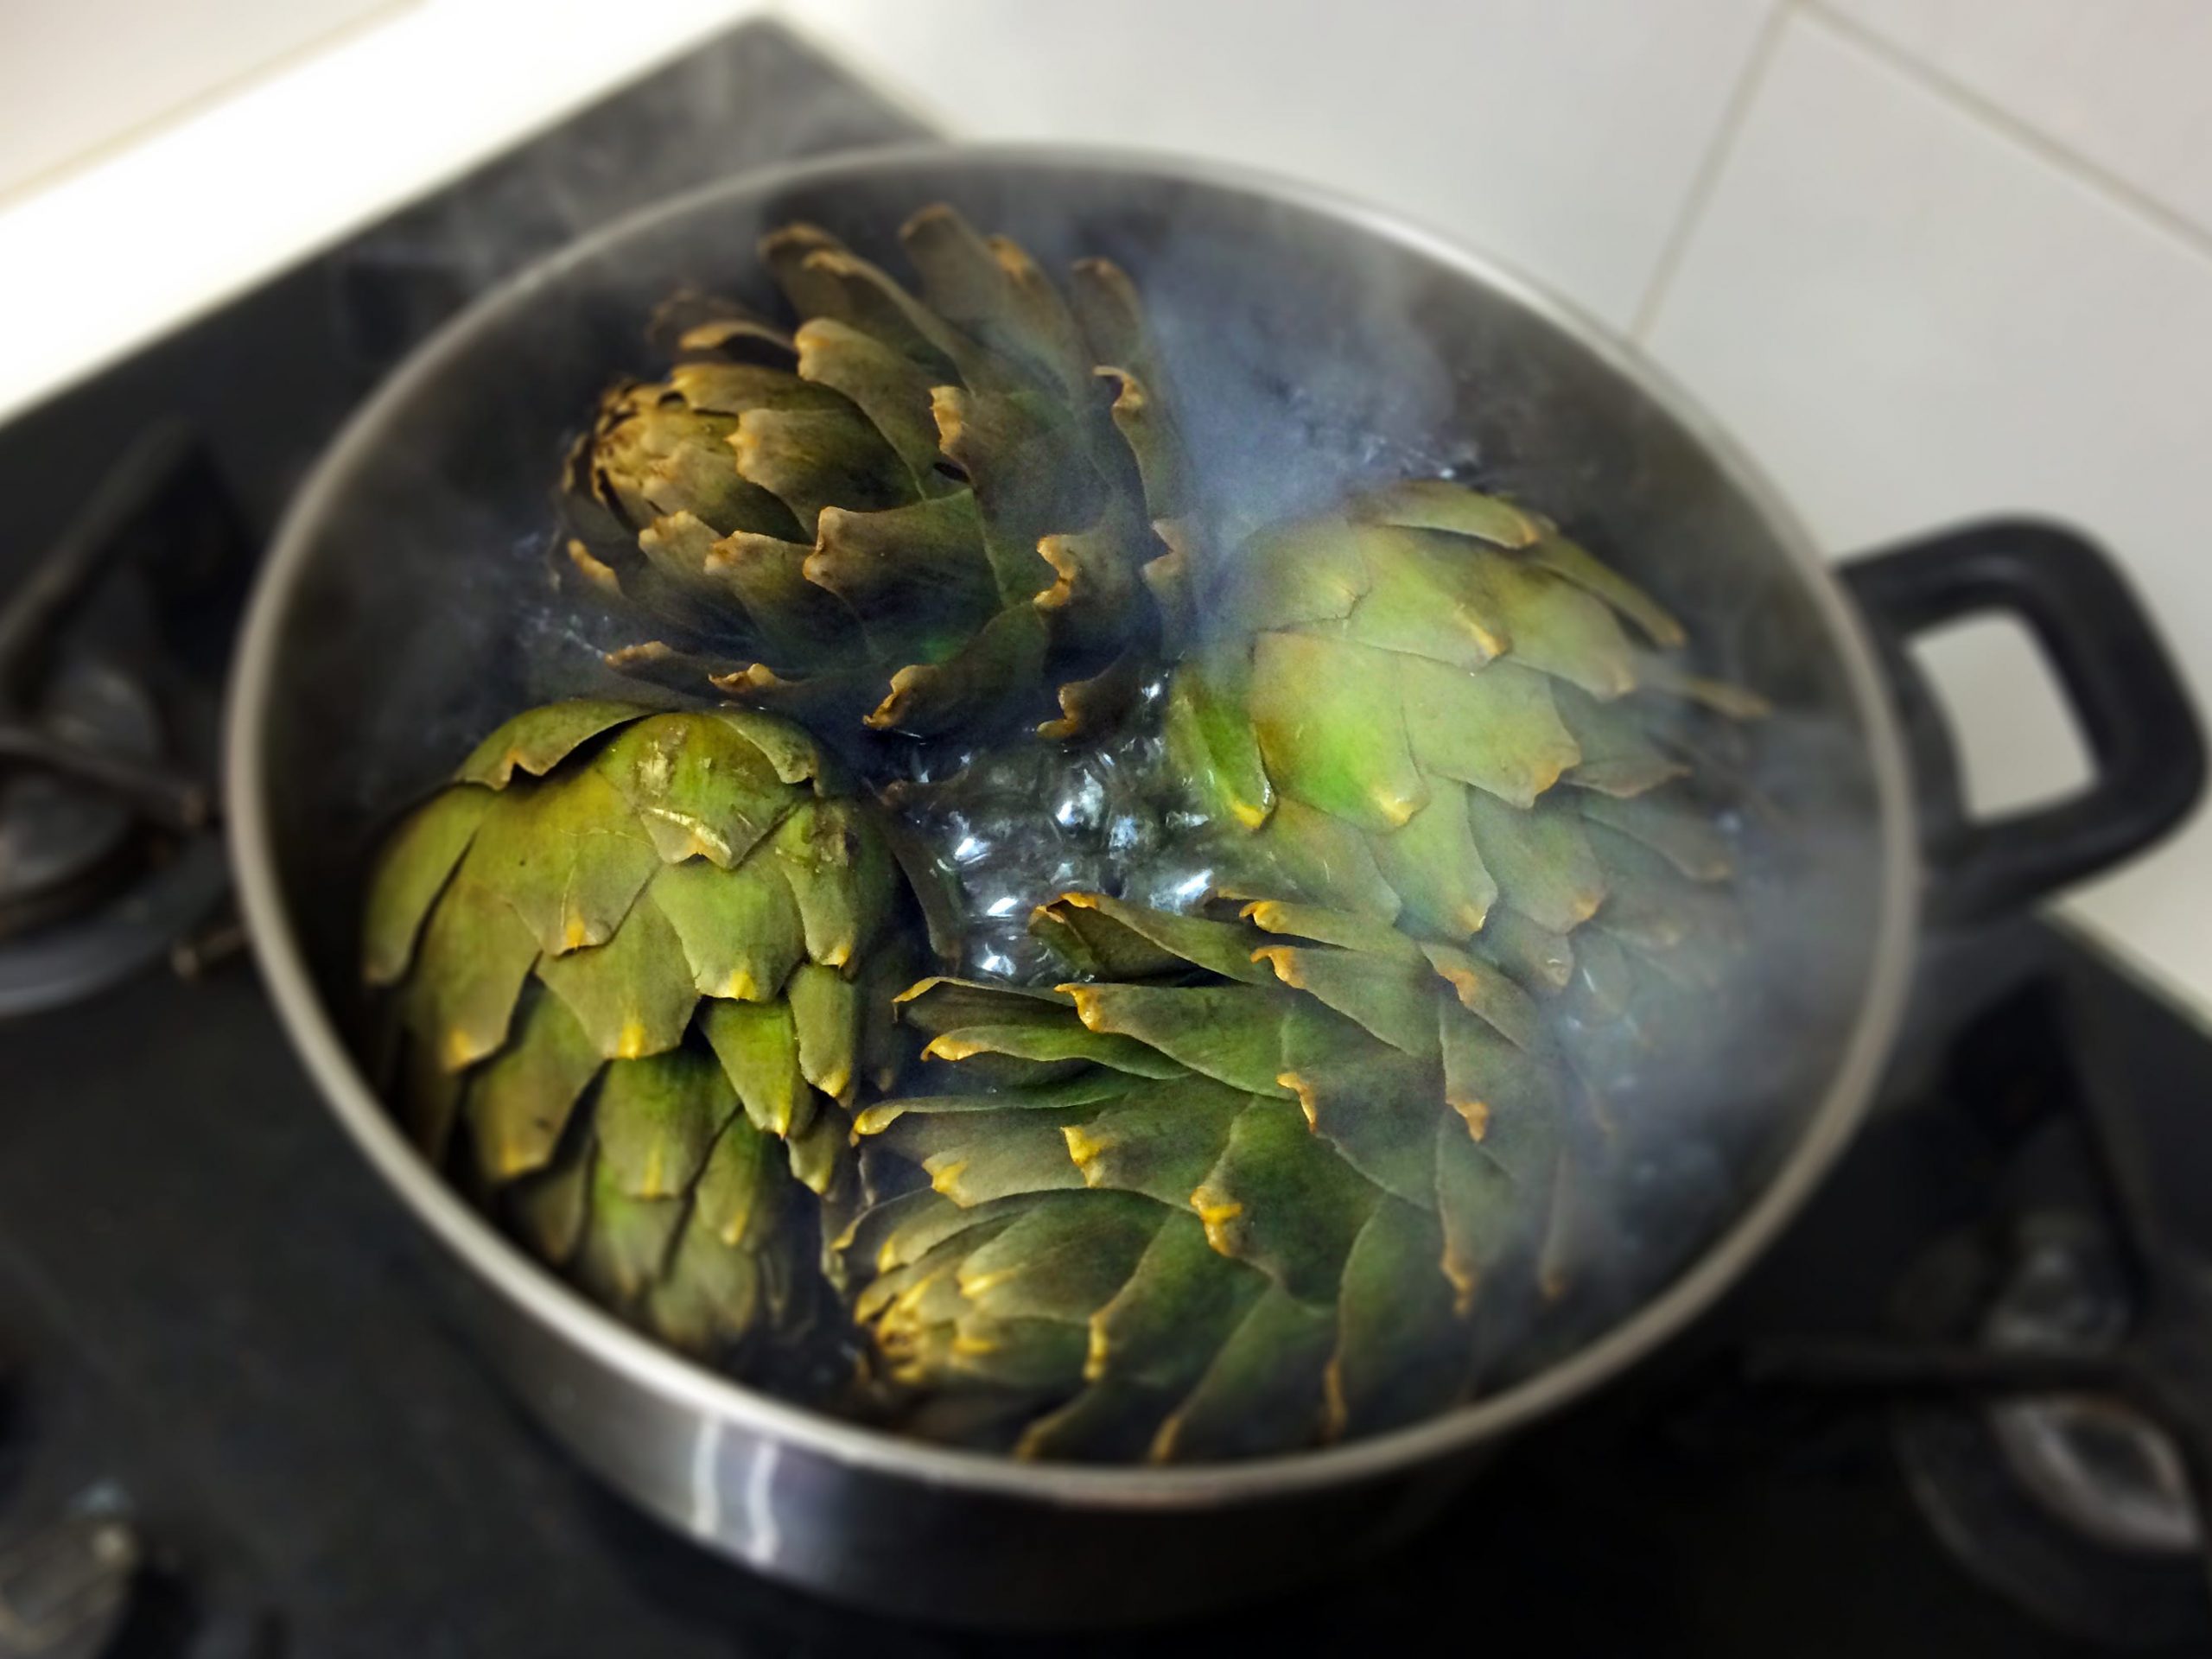 Four artichokes boiling in a pot of water